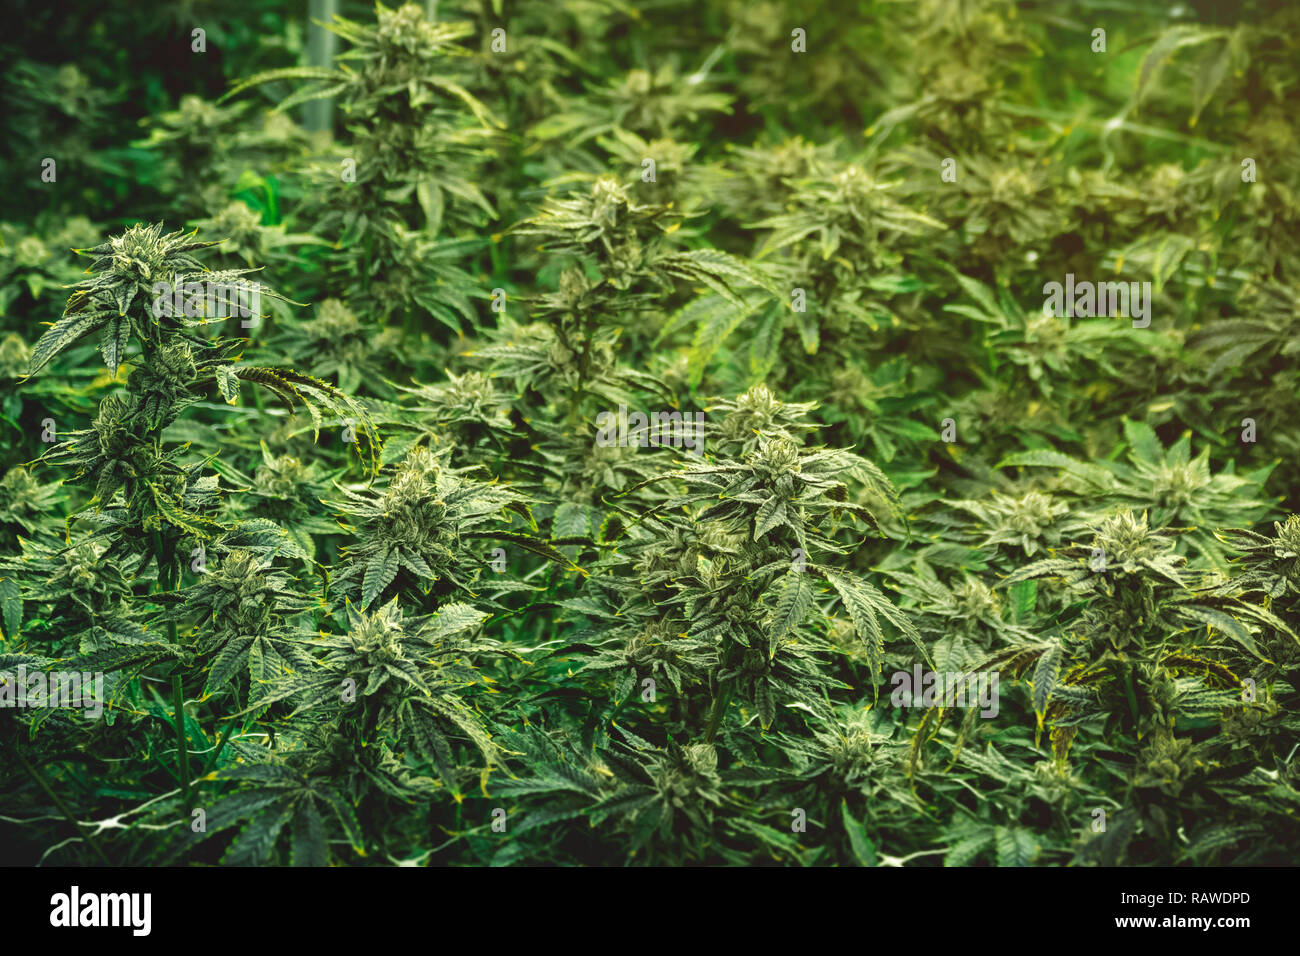 Texture wallpaper of marijuana growing operation indoor warehouse with space for titling Stock Photo